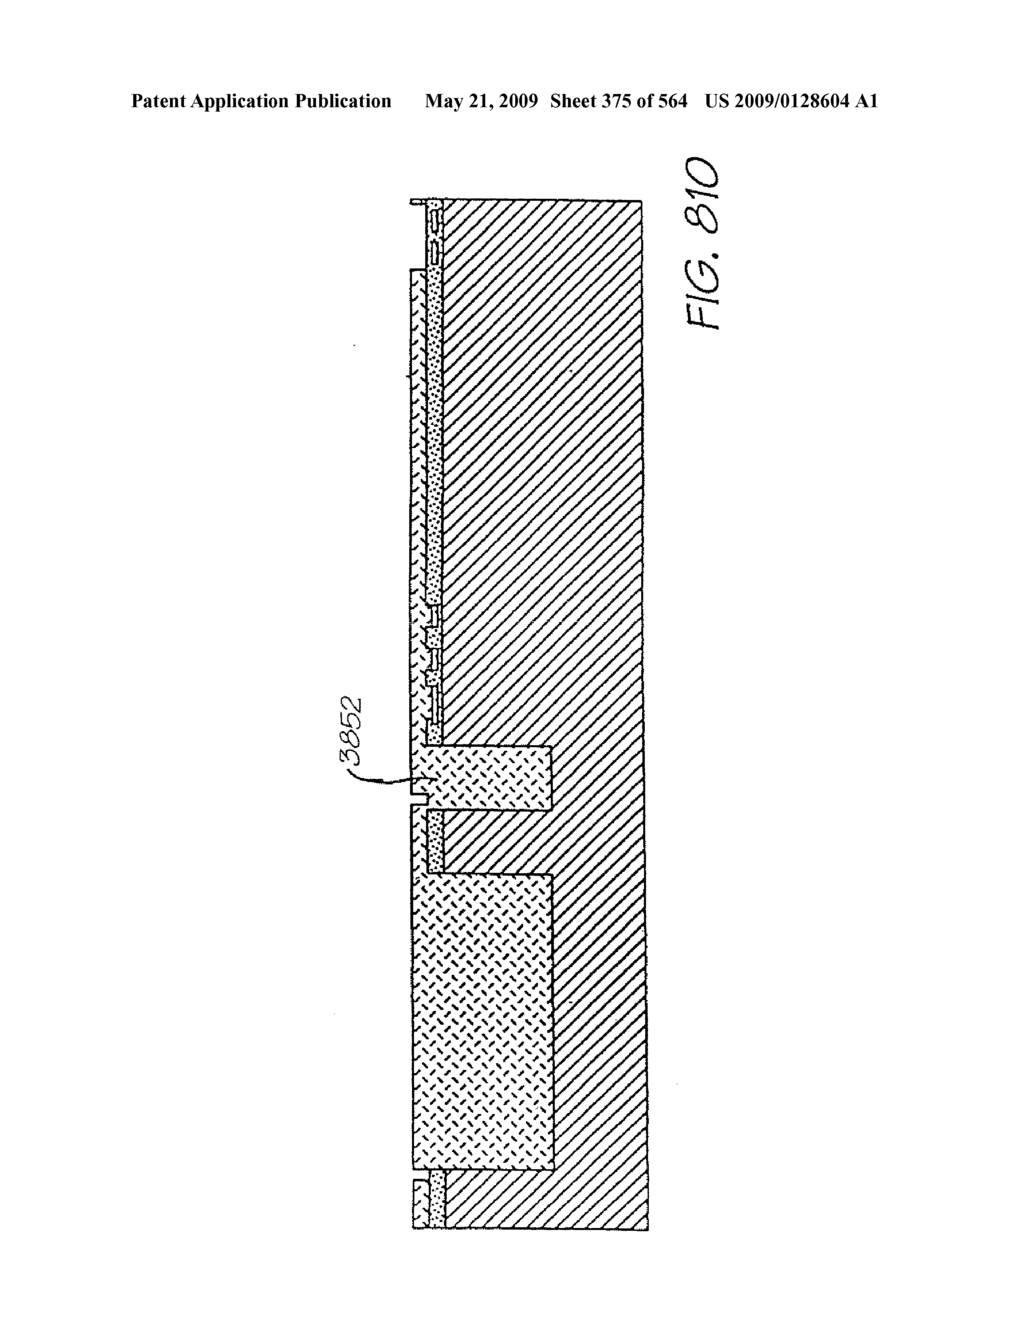 INKJET NOZZLE WITH PADDLE LAYER SANDWICHED BETWEEN FIRST AND SECOND WAFERS - diagram, schematic, and image 376